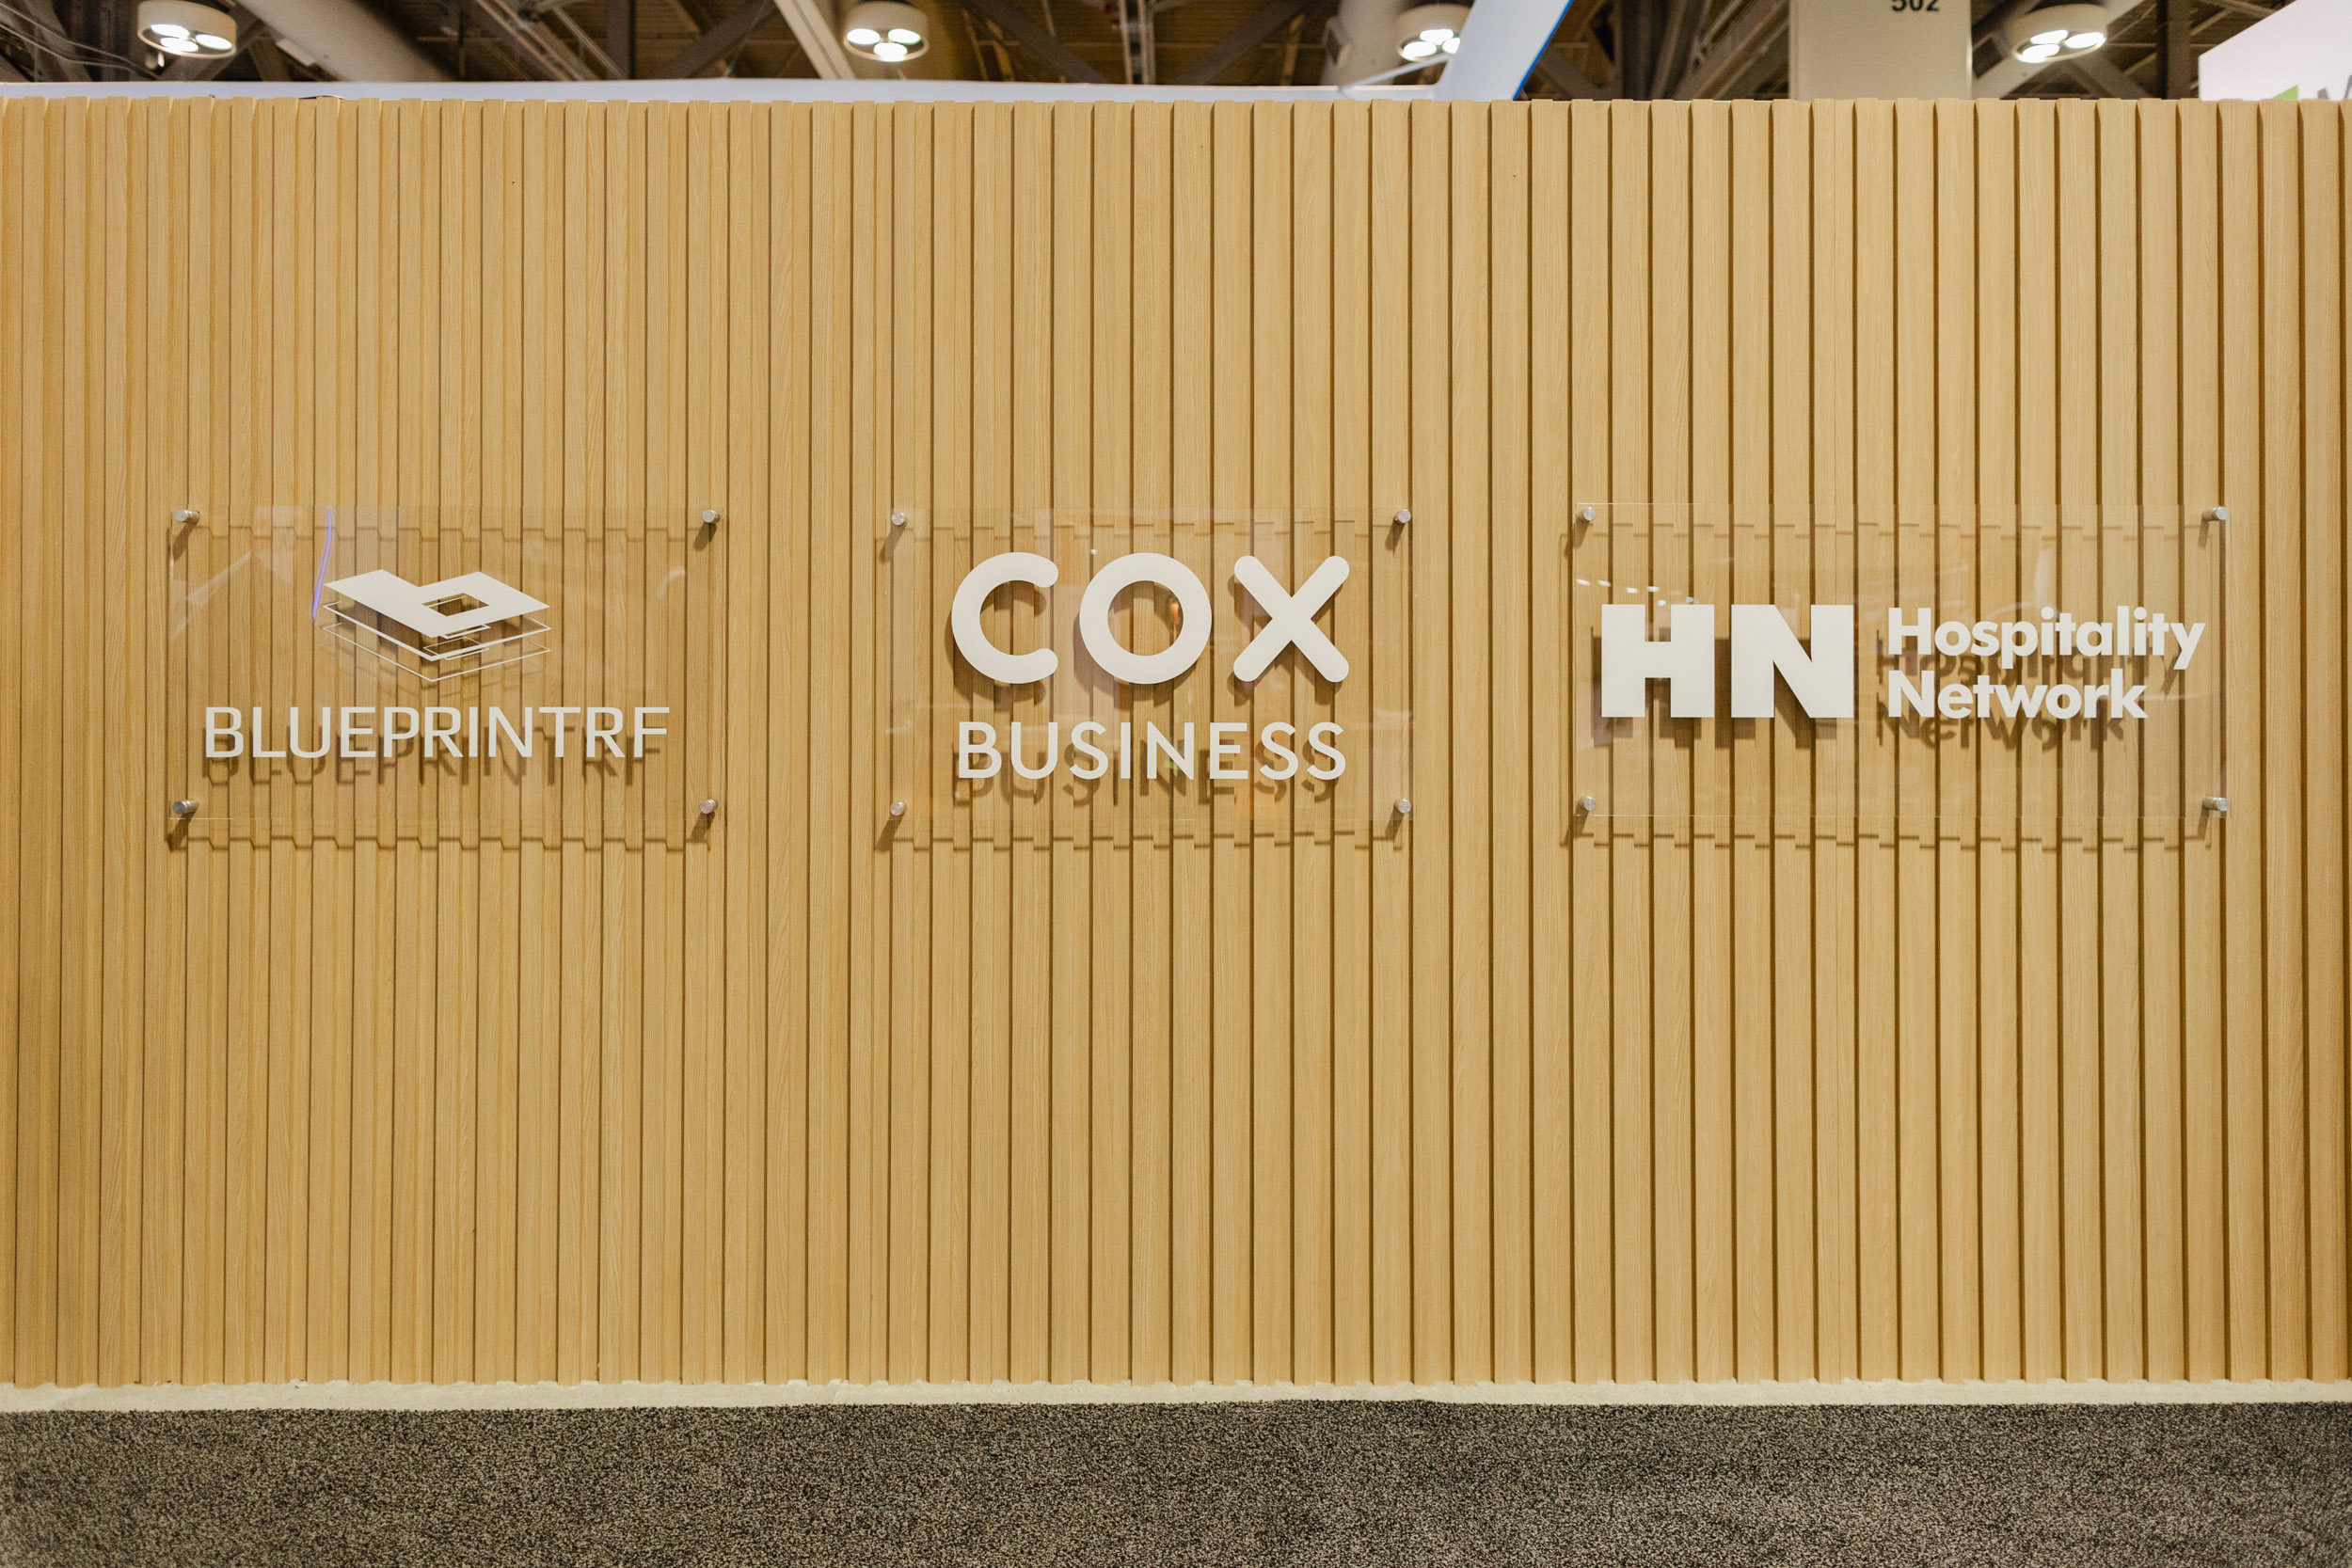 Cox business booth at Toronto Trade show.